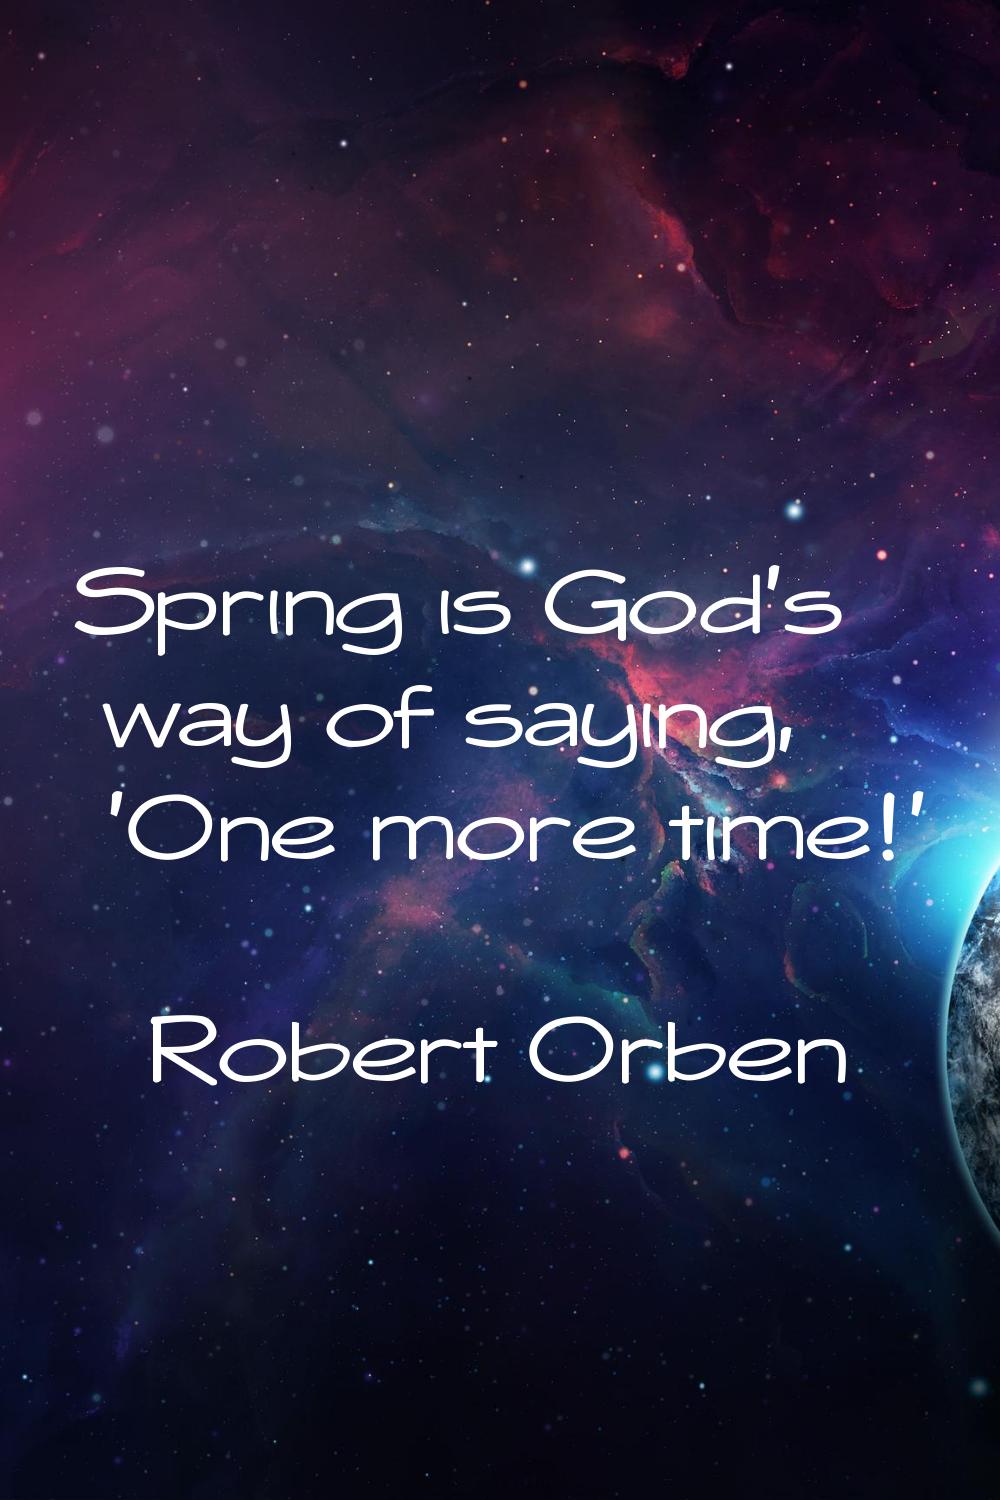 Spring is God's way of saying, 'One more time!'